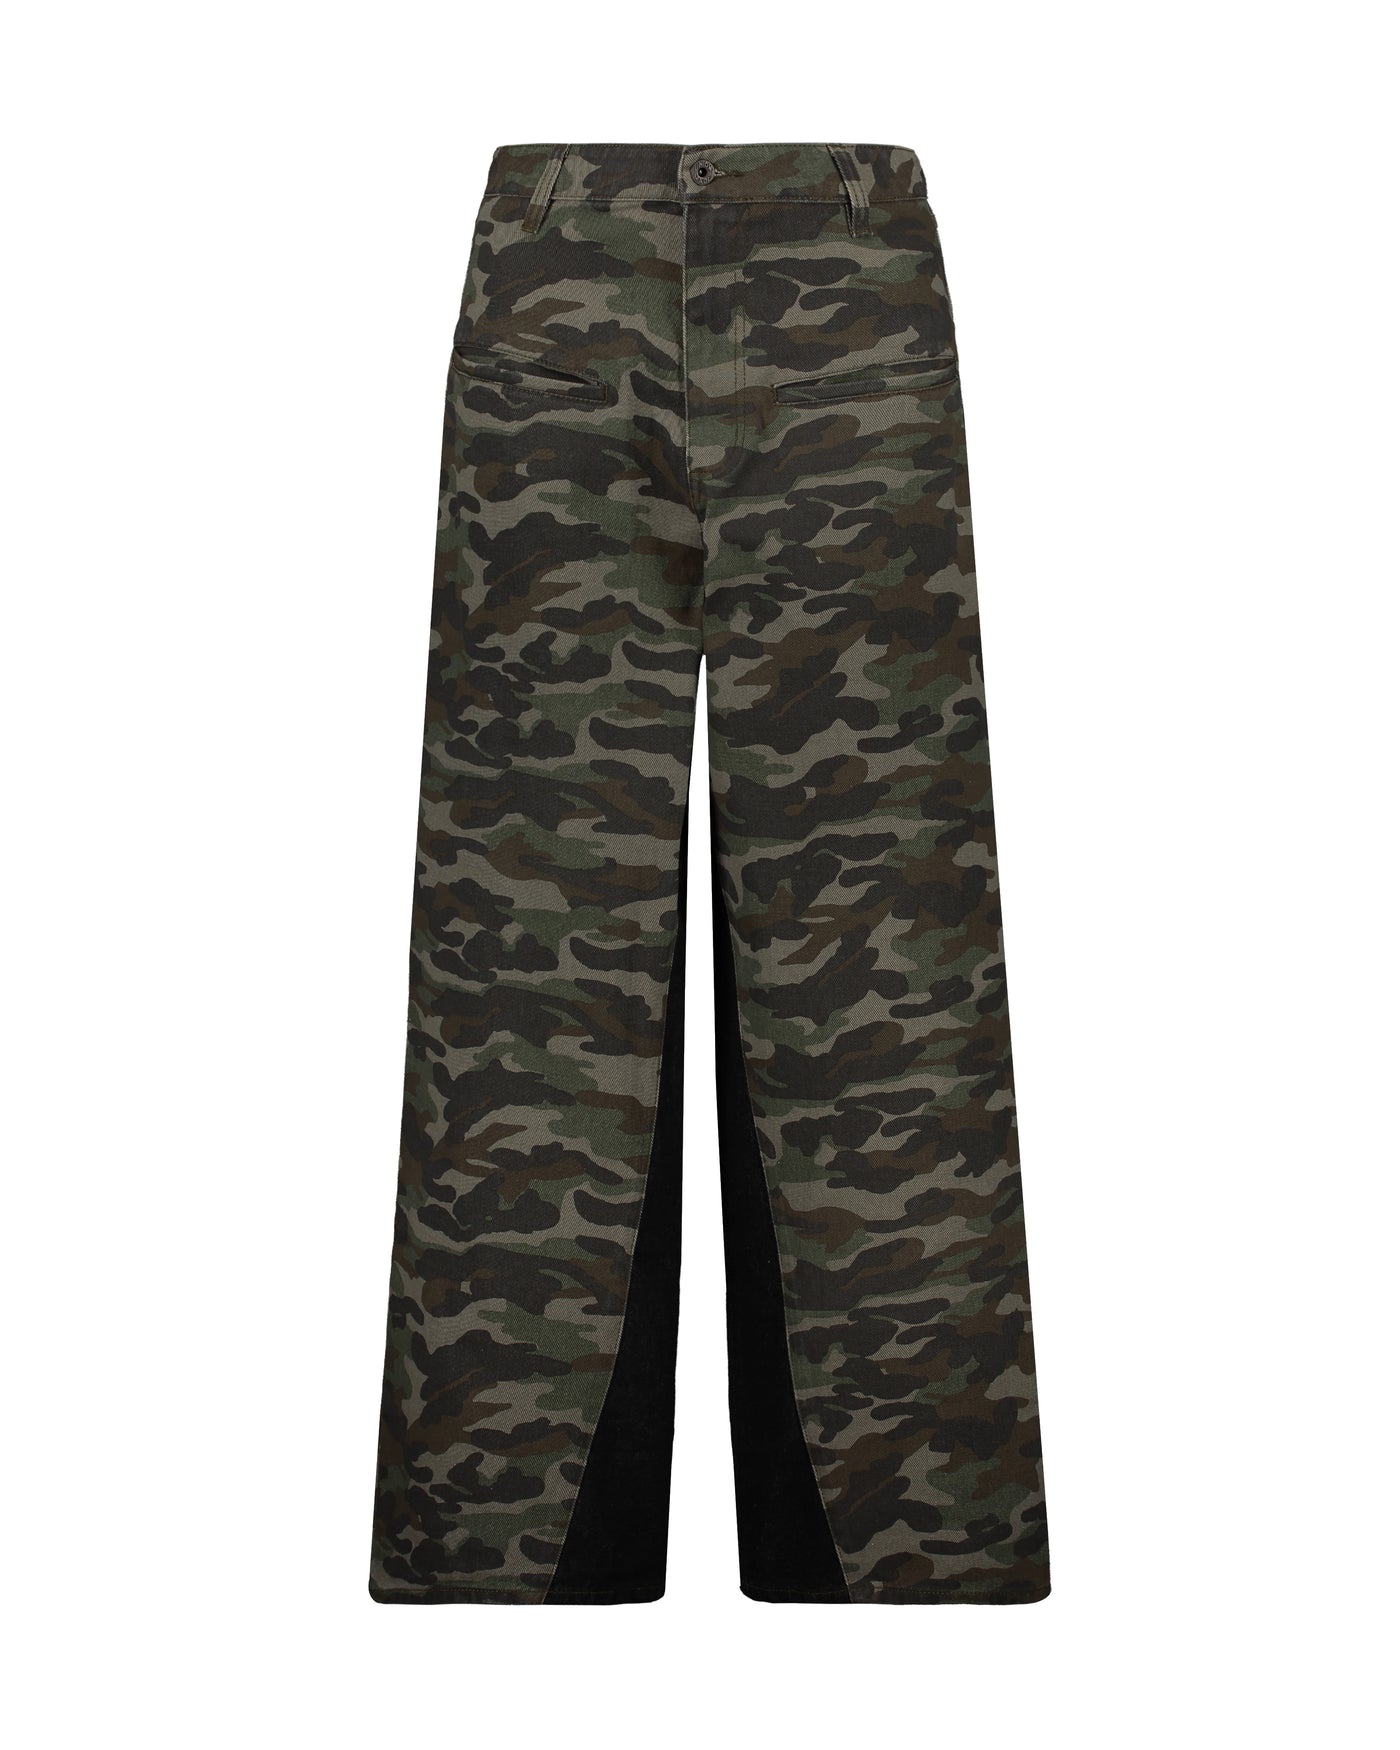 FaxCopyExpress Casual camouflage pants-